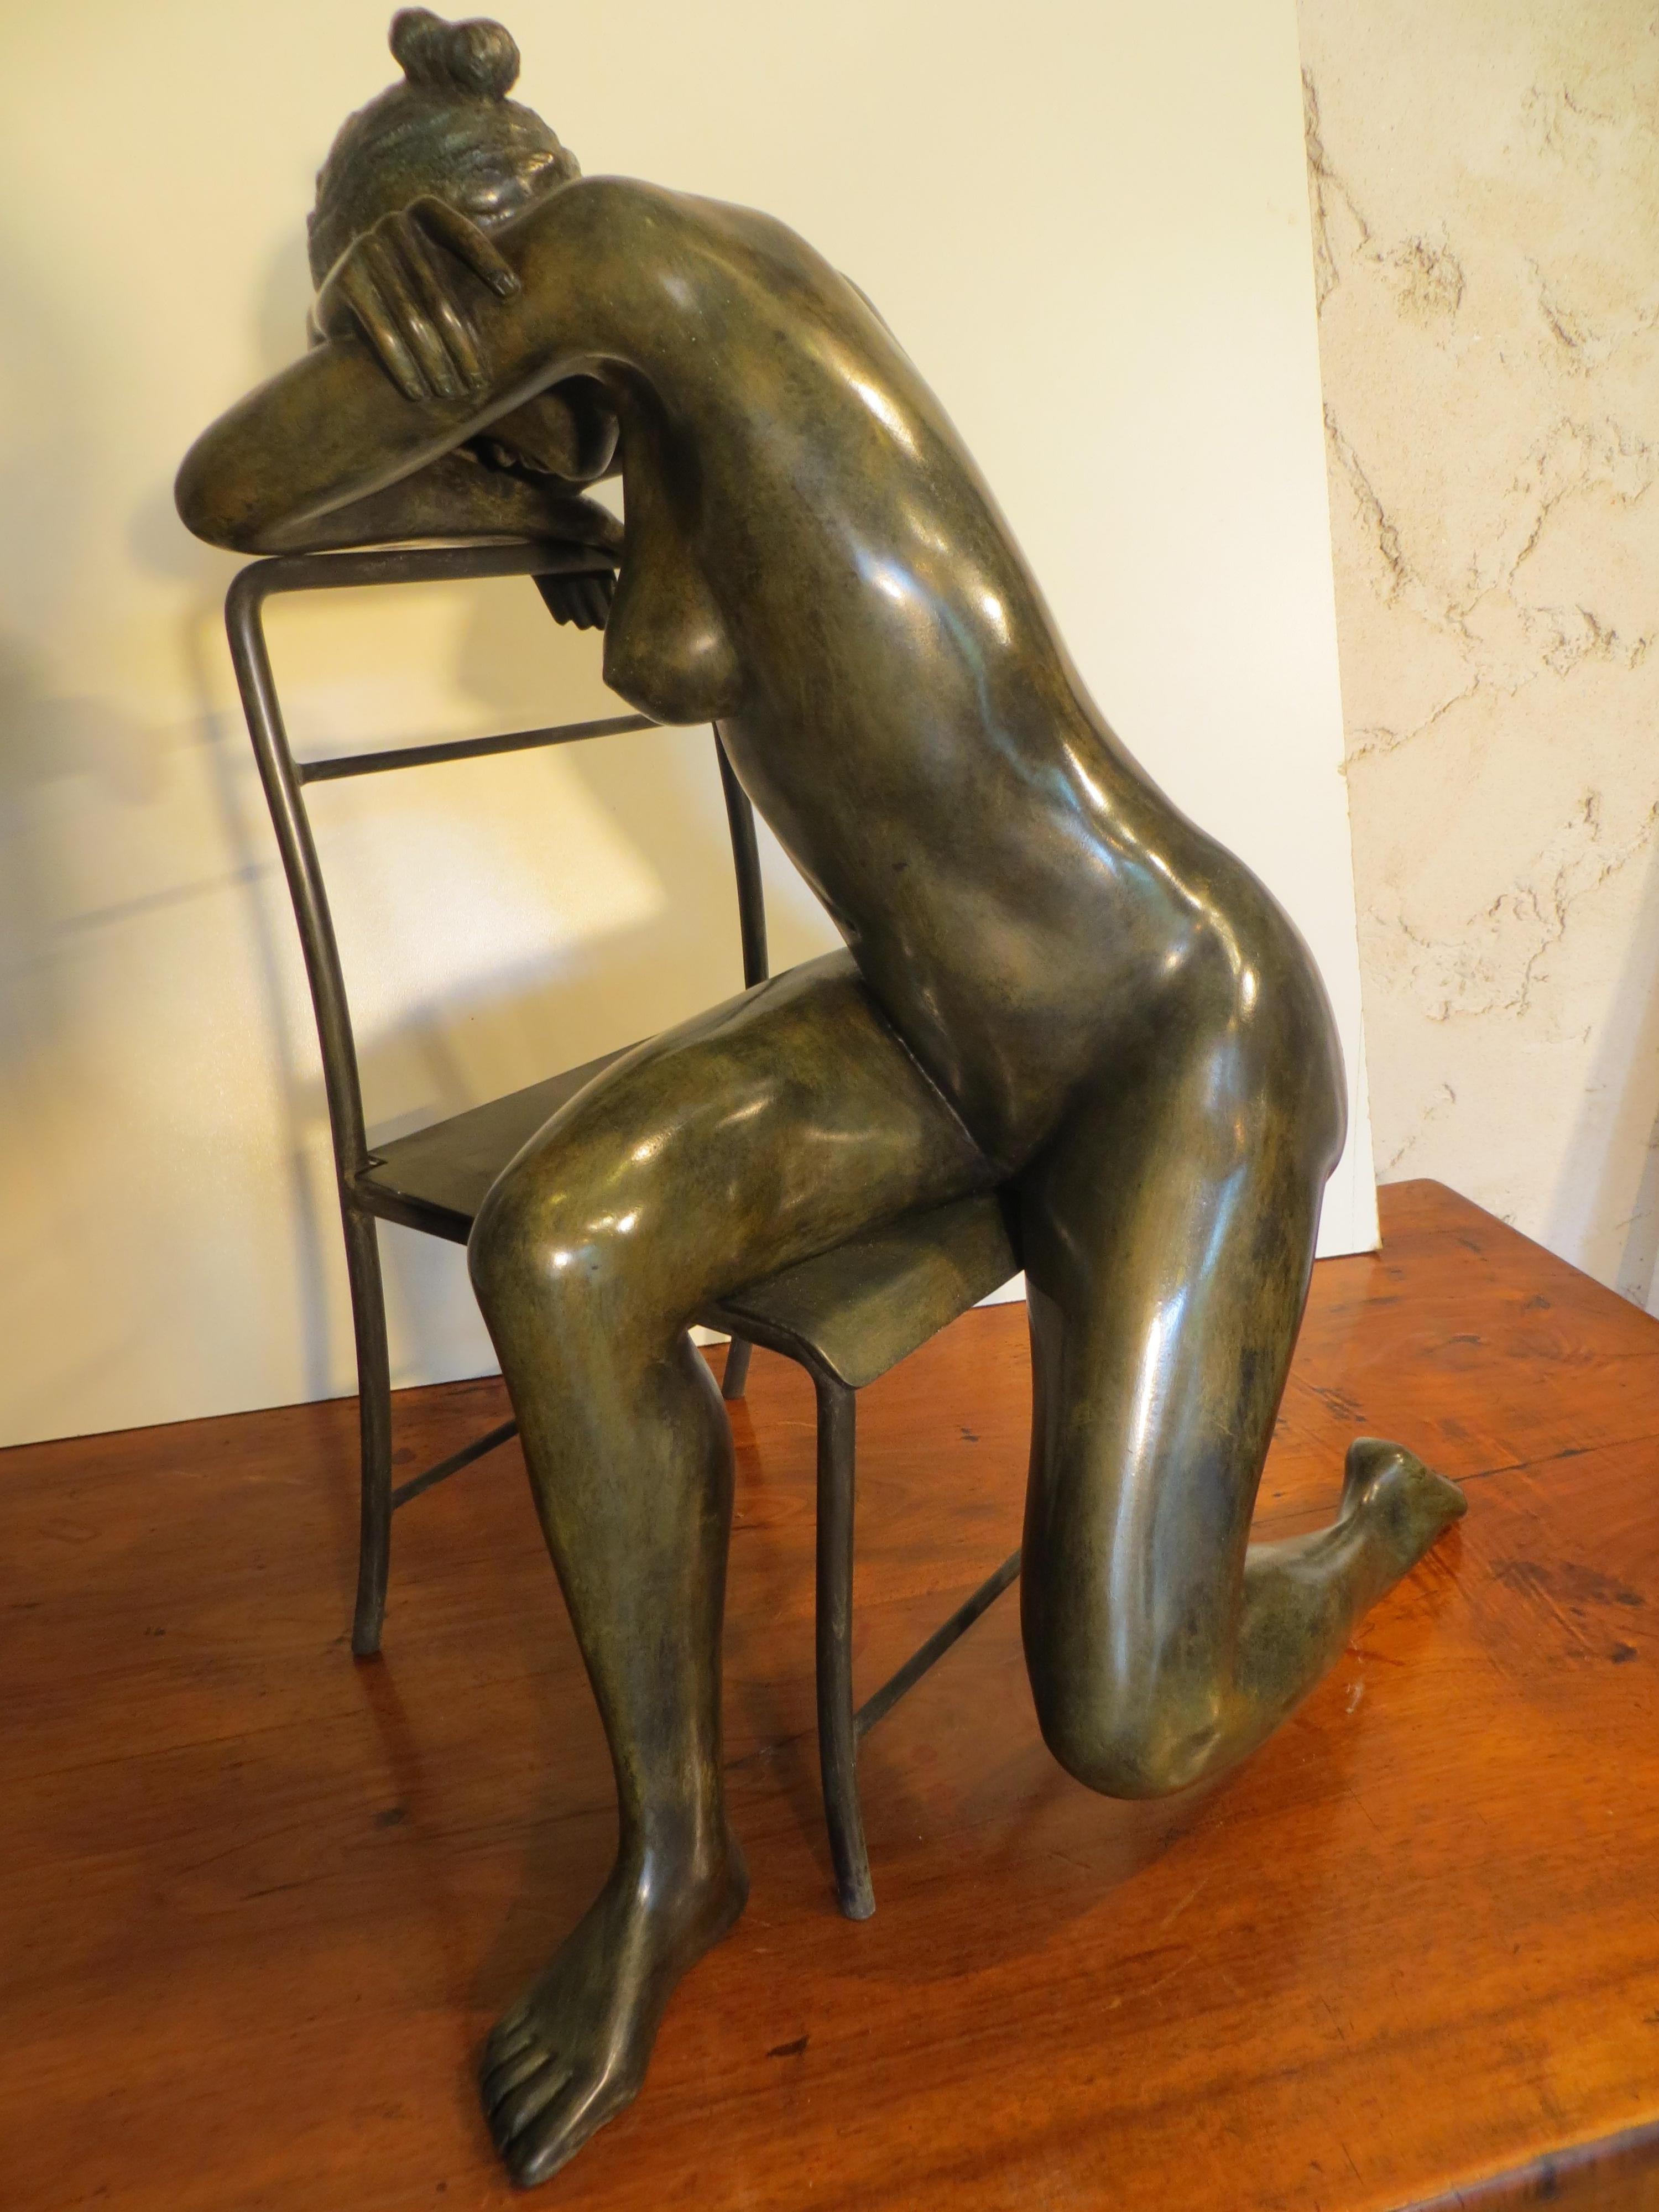 Pose on a Chair - Sculpture by Patrick Brun